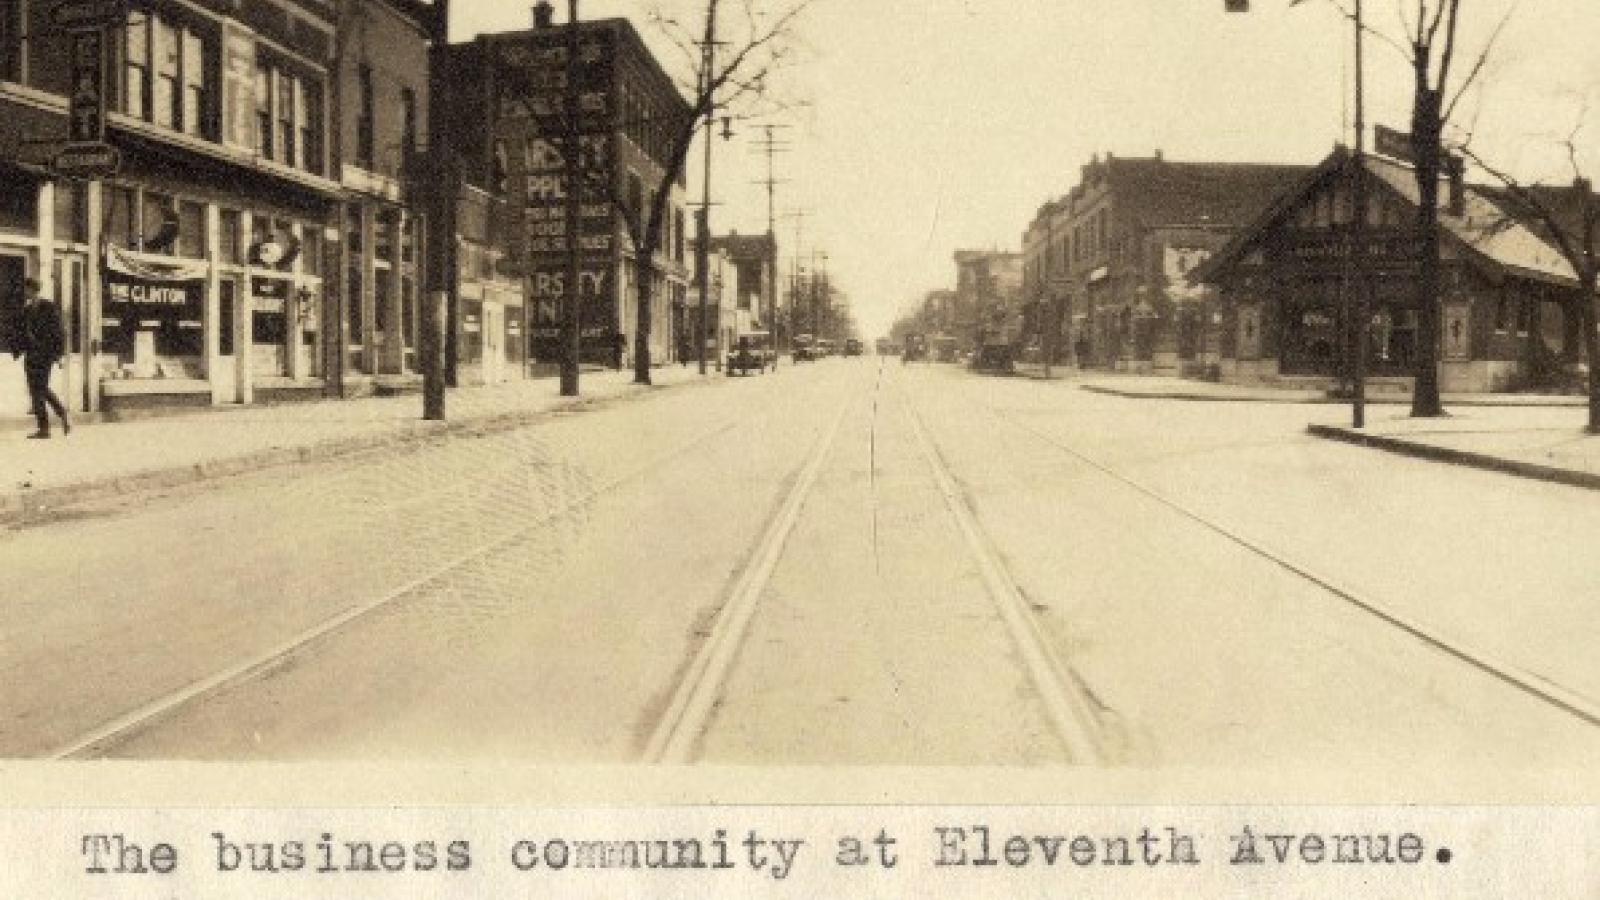 Historical Photo of Columbus, Ohio from Blanchard Collection